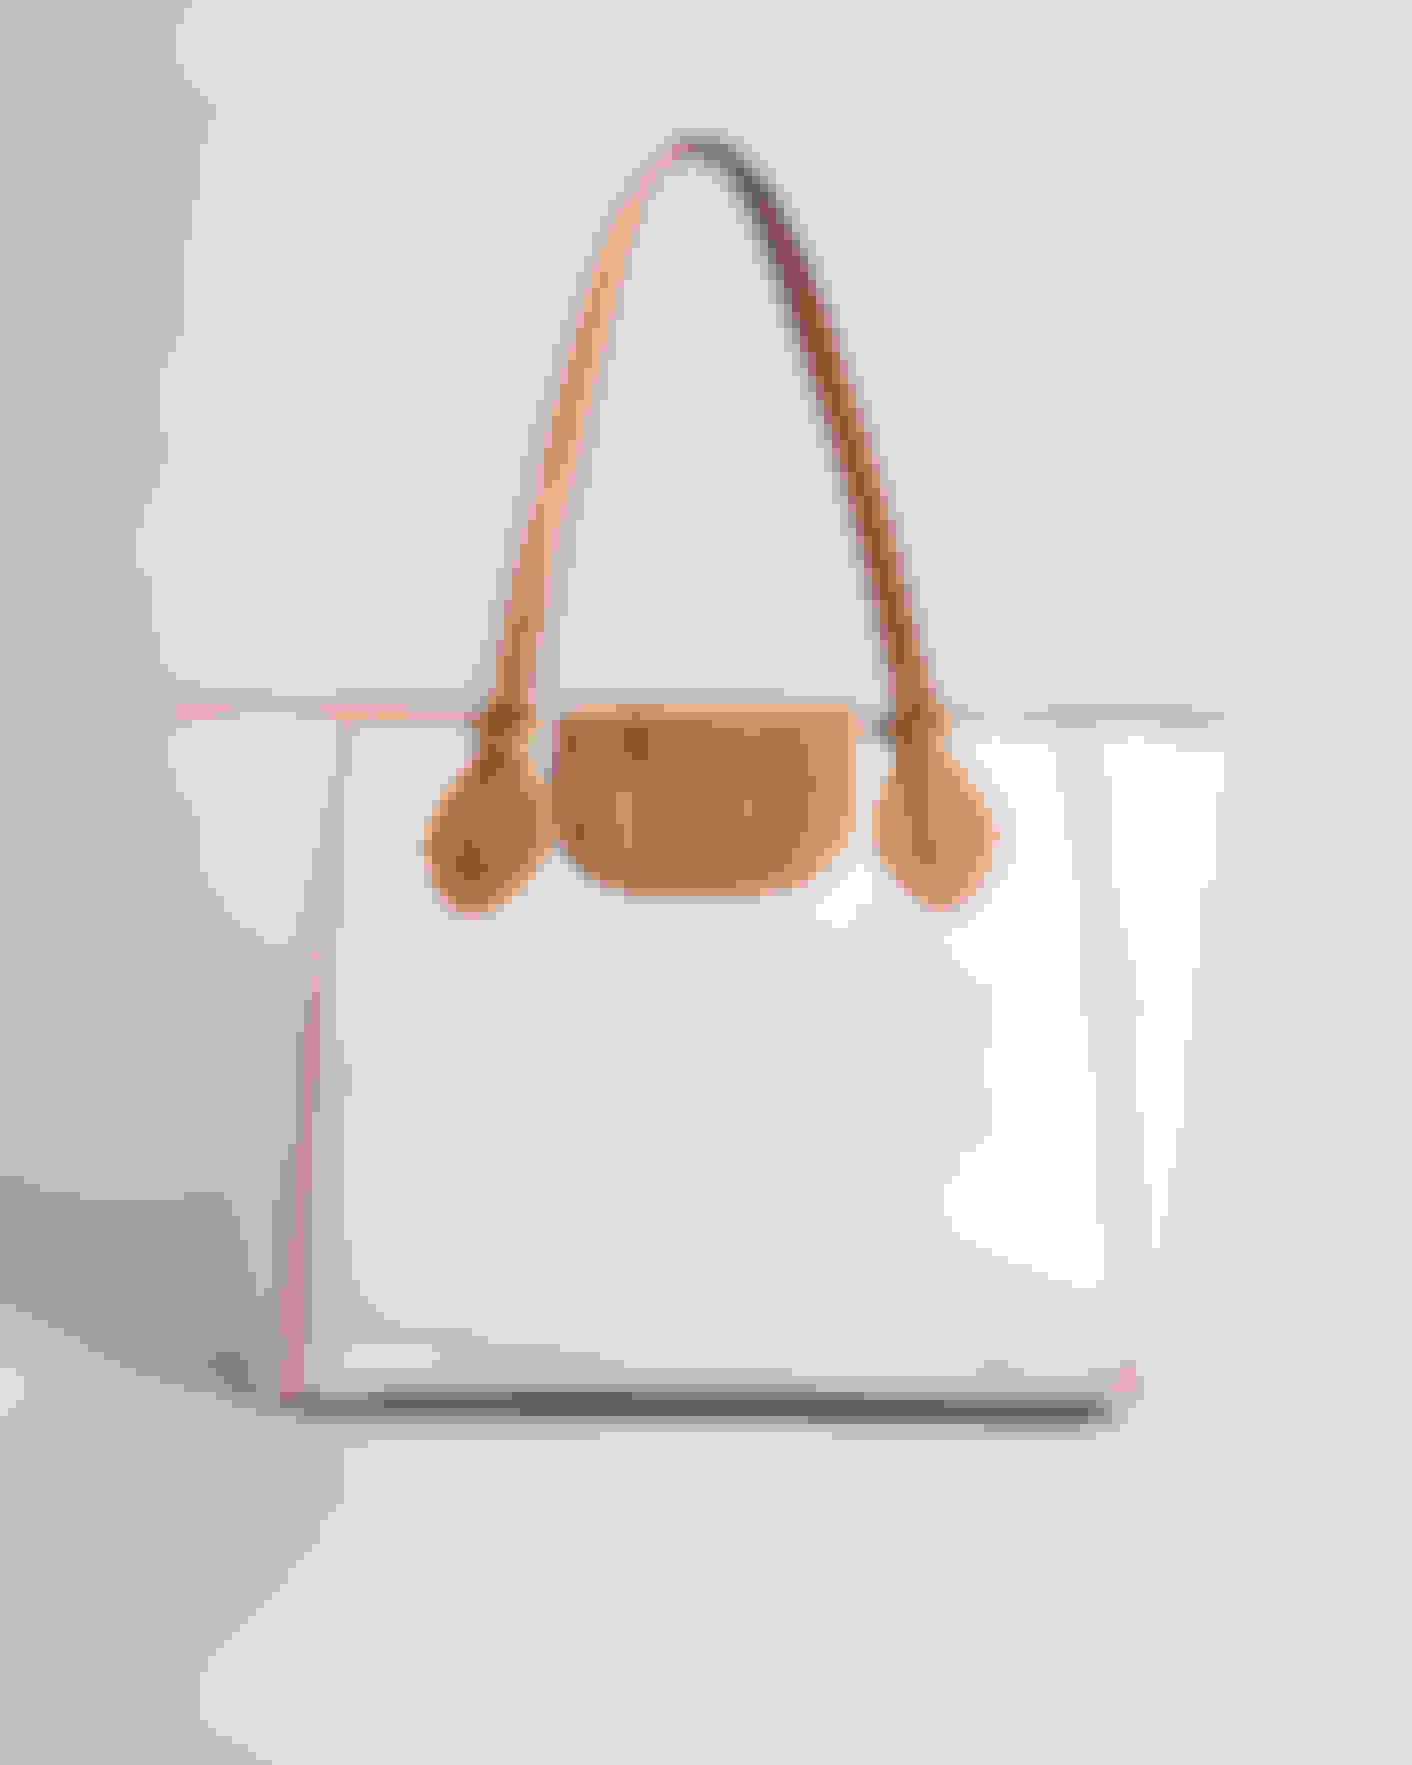 Natural Whipstitch Detail Tote Bag Ted Baker